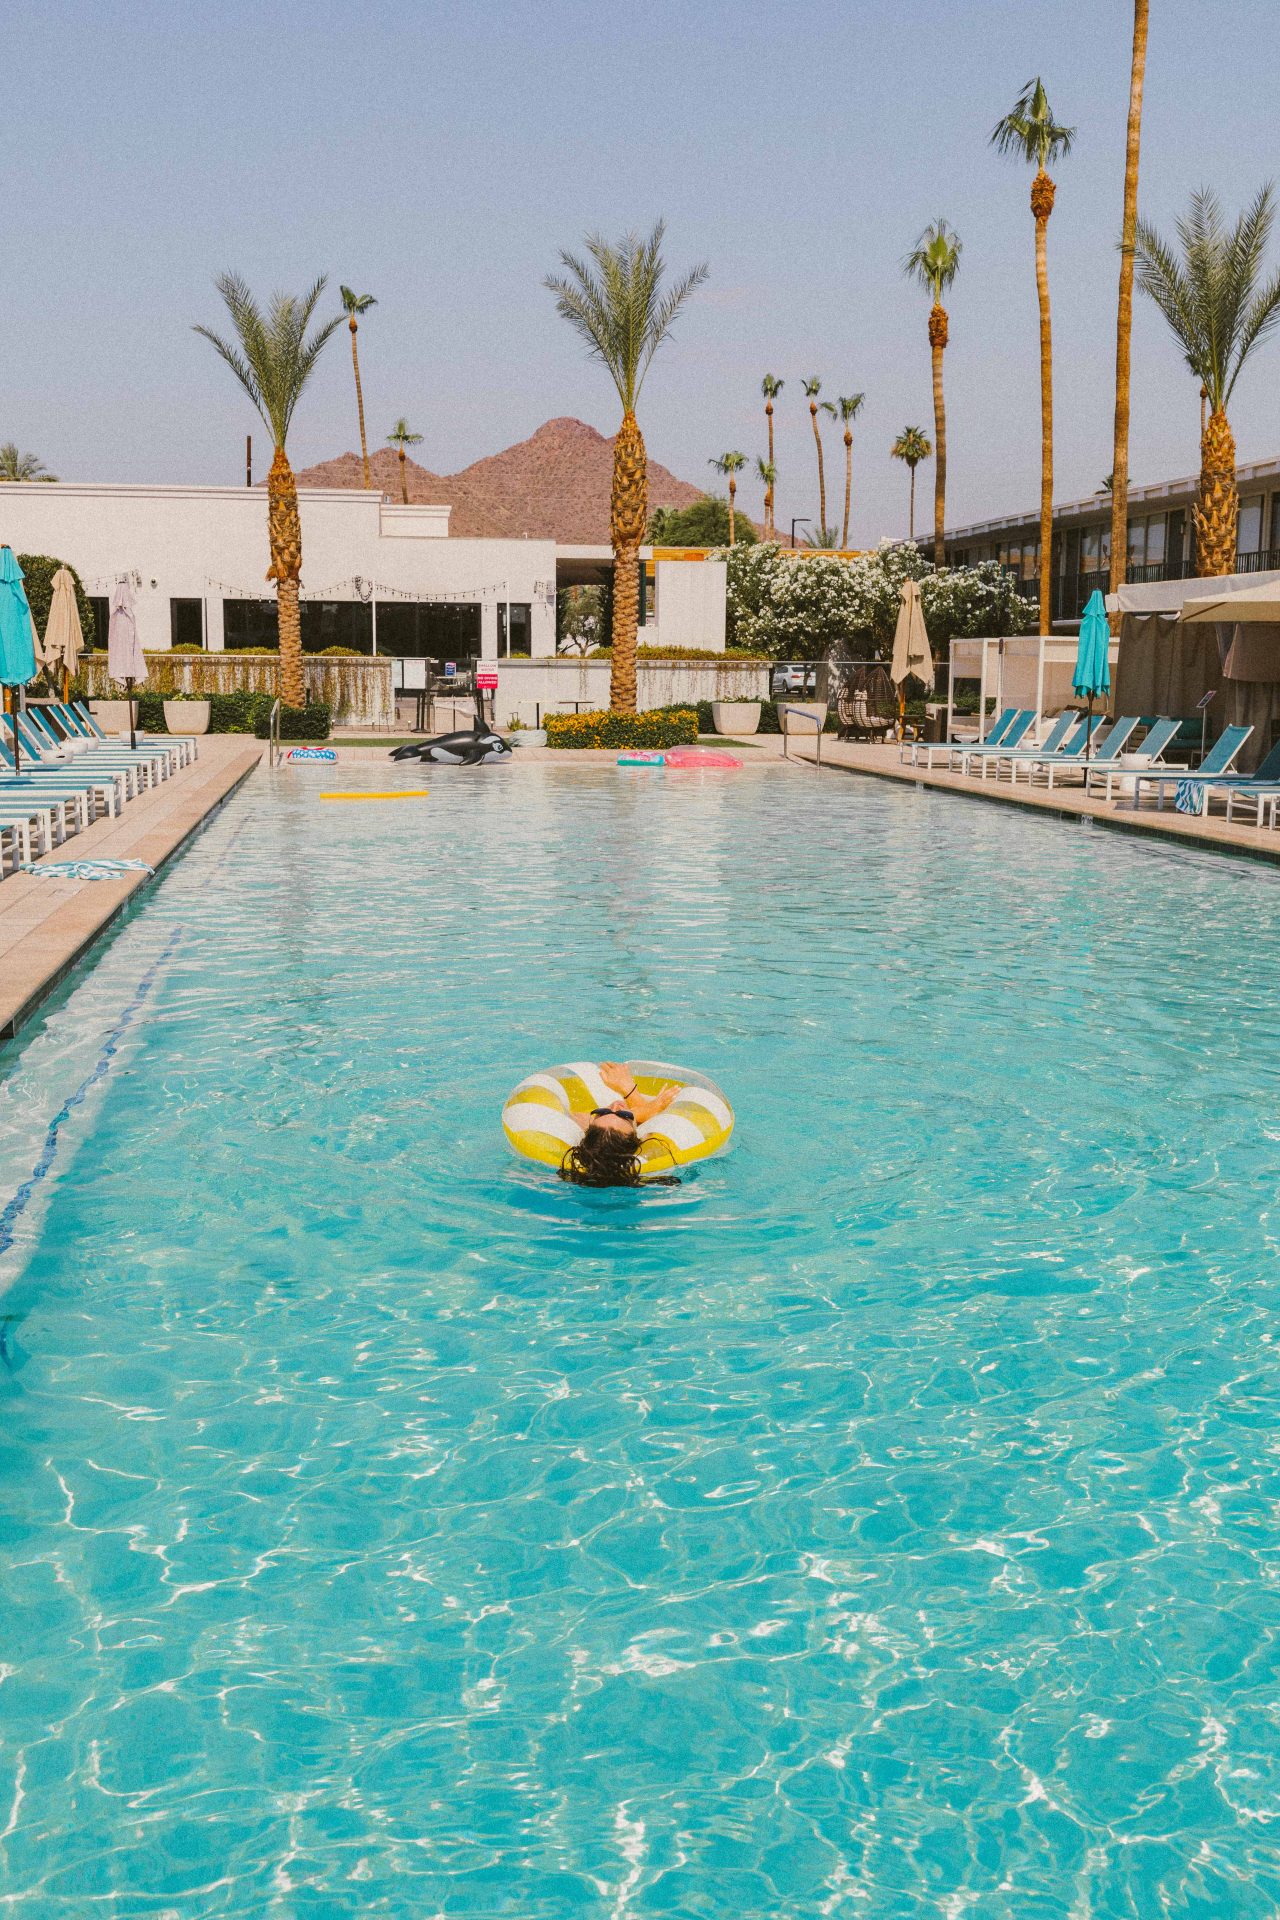 Scottsdale Arizona travel guide, what to do in scottsdale, where to stay scottsdale Arizona, hotel Adeline, brunch, breakfast, coffee, pool time, cabana, hotel Adeline in scottsdale, drinks by the pool, honeymoon, bachelorette, what to do in scottsdale, boutique motel, affordable hotels